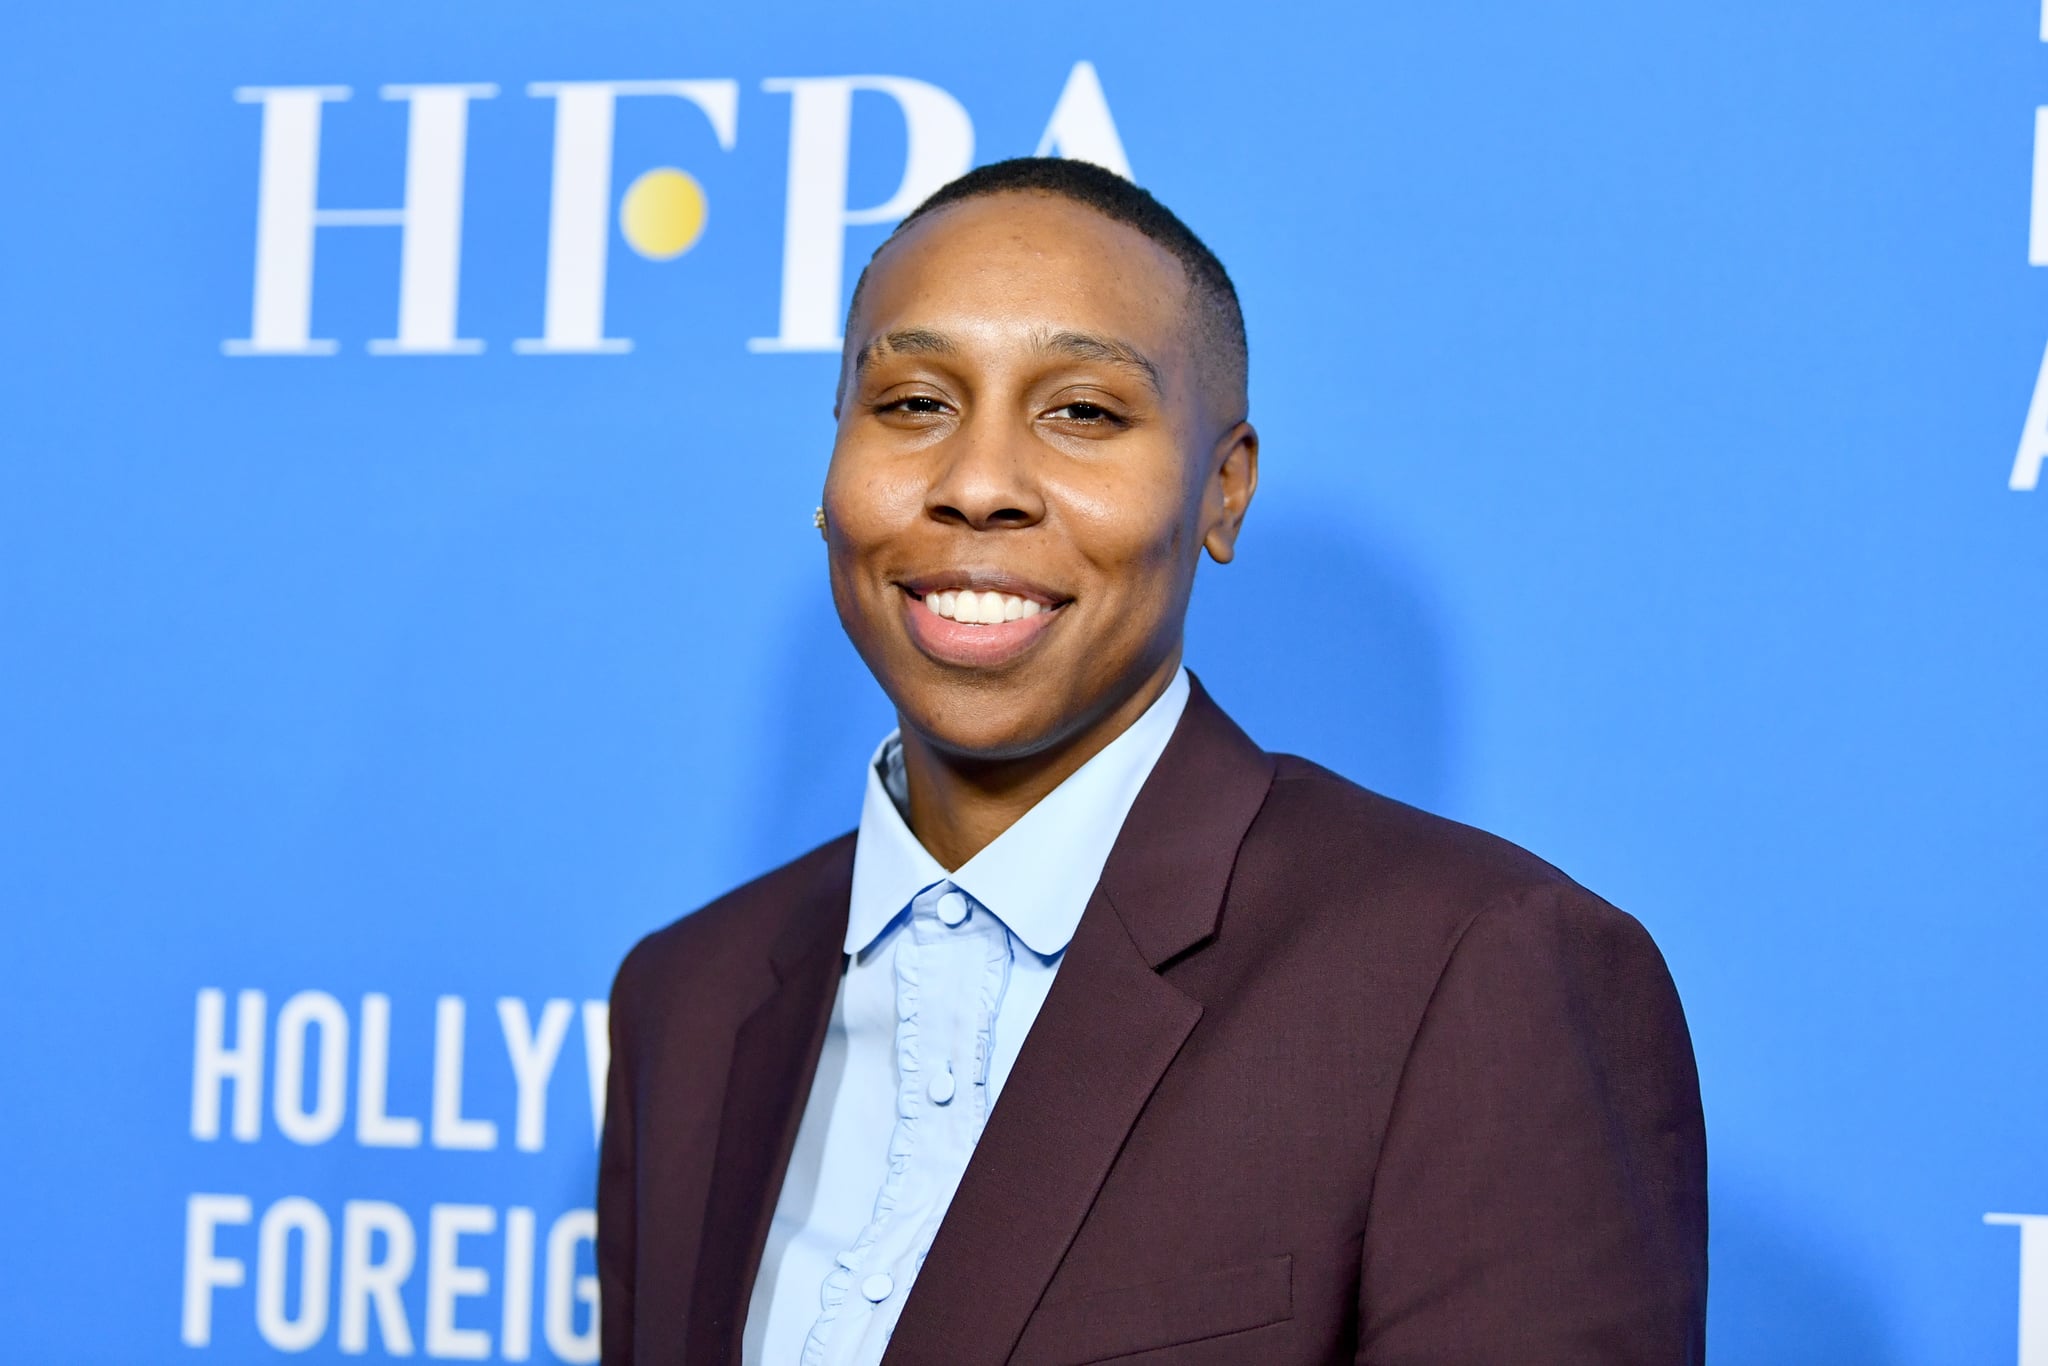 BEVERLY HILLS, CA - AUGUST 09:  Lena Waithe attends the Hollywood Foreign Press Association's Grants Banquet at The Beverly Hilton Hotel on August 9, 2018 in Beverly Hills, California.  (Photo by Emma McIntyre/Getty Images)